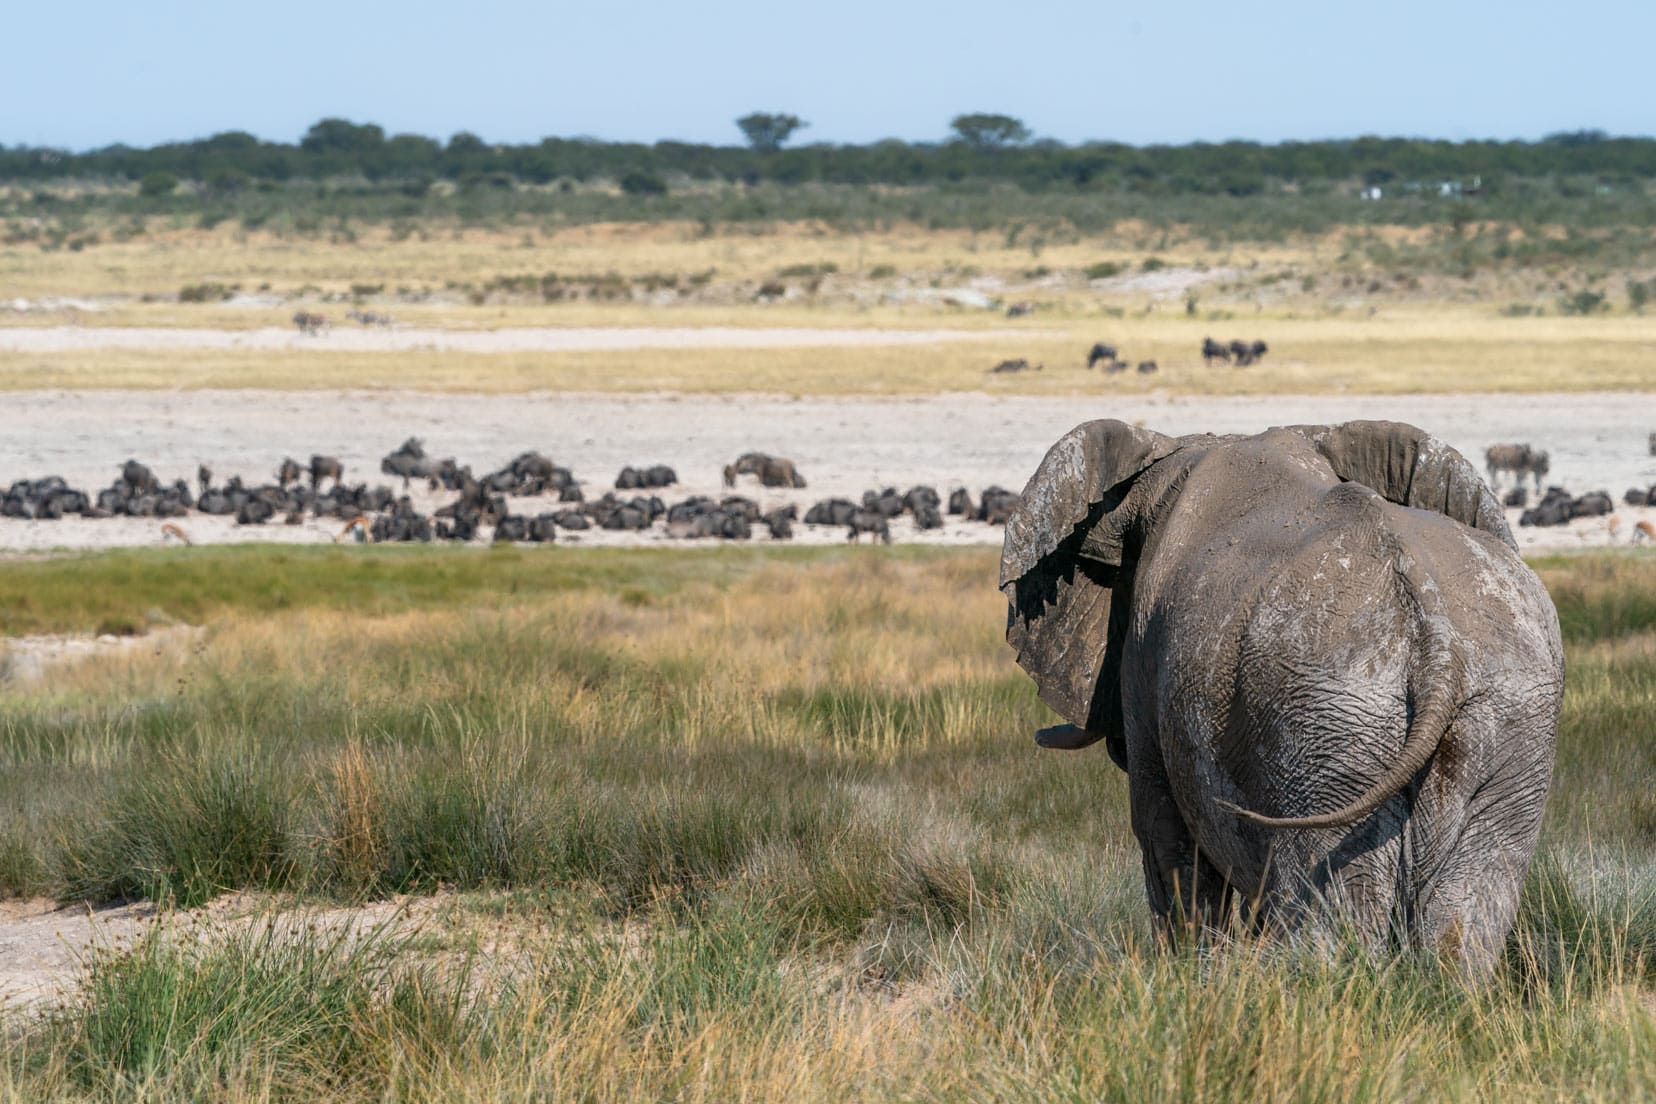 etosha-elephant in the foreground and blurred wildebeest in the back ground